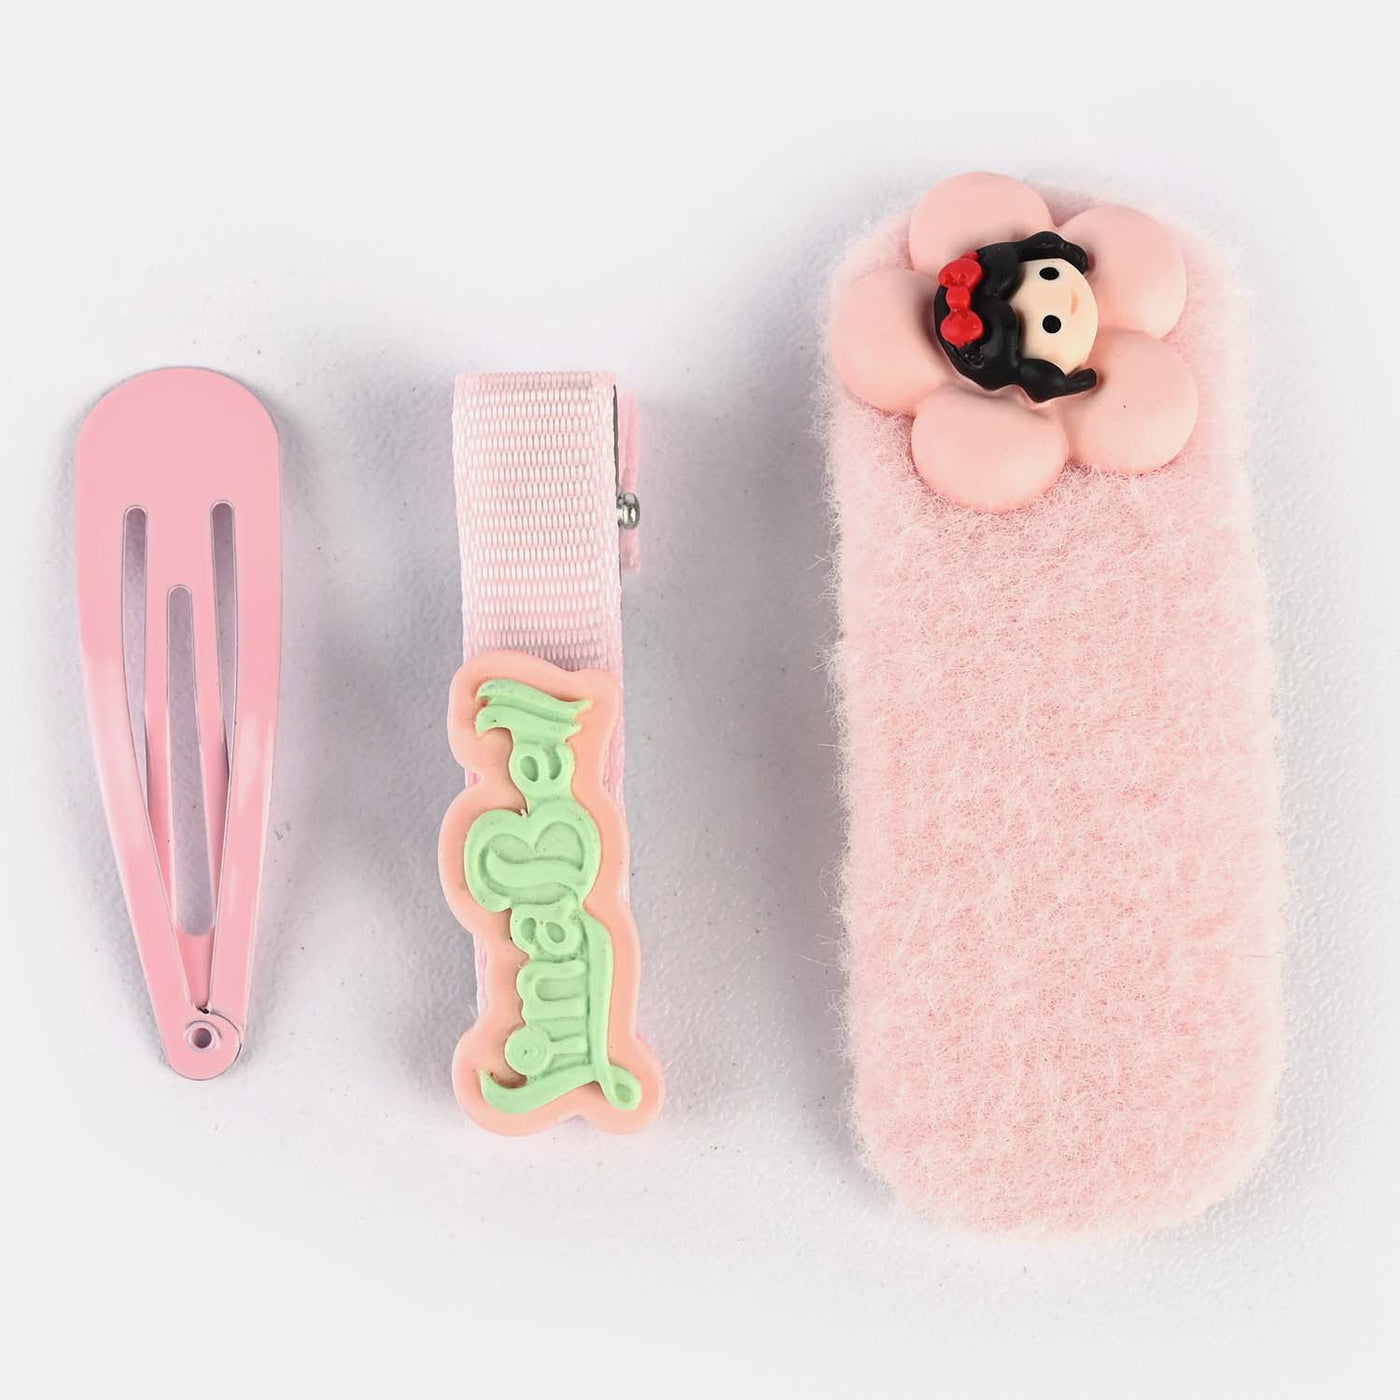 Stylish Hair Pins/Clips For Girls